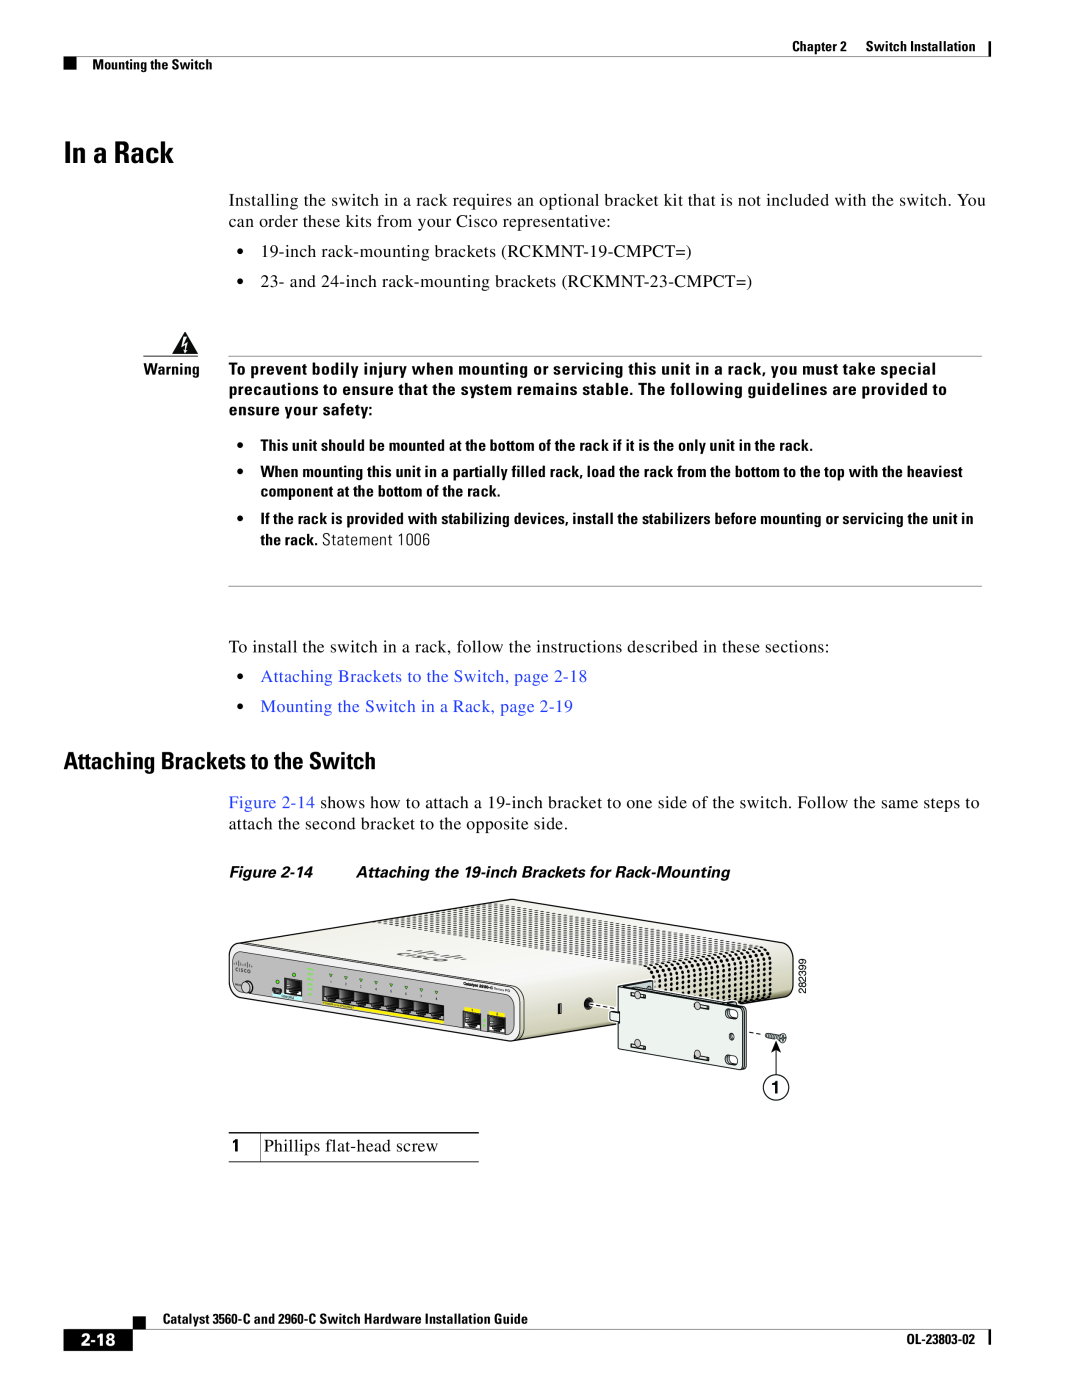 Cisco Systems N55M4Q In a Rack, Attaching Brackets to the Switch, page, Mounting the Switch in a Rack, page, 2-18 